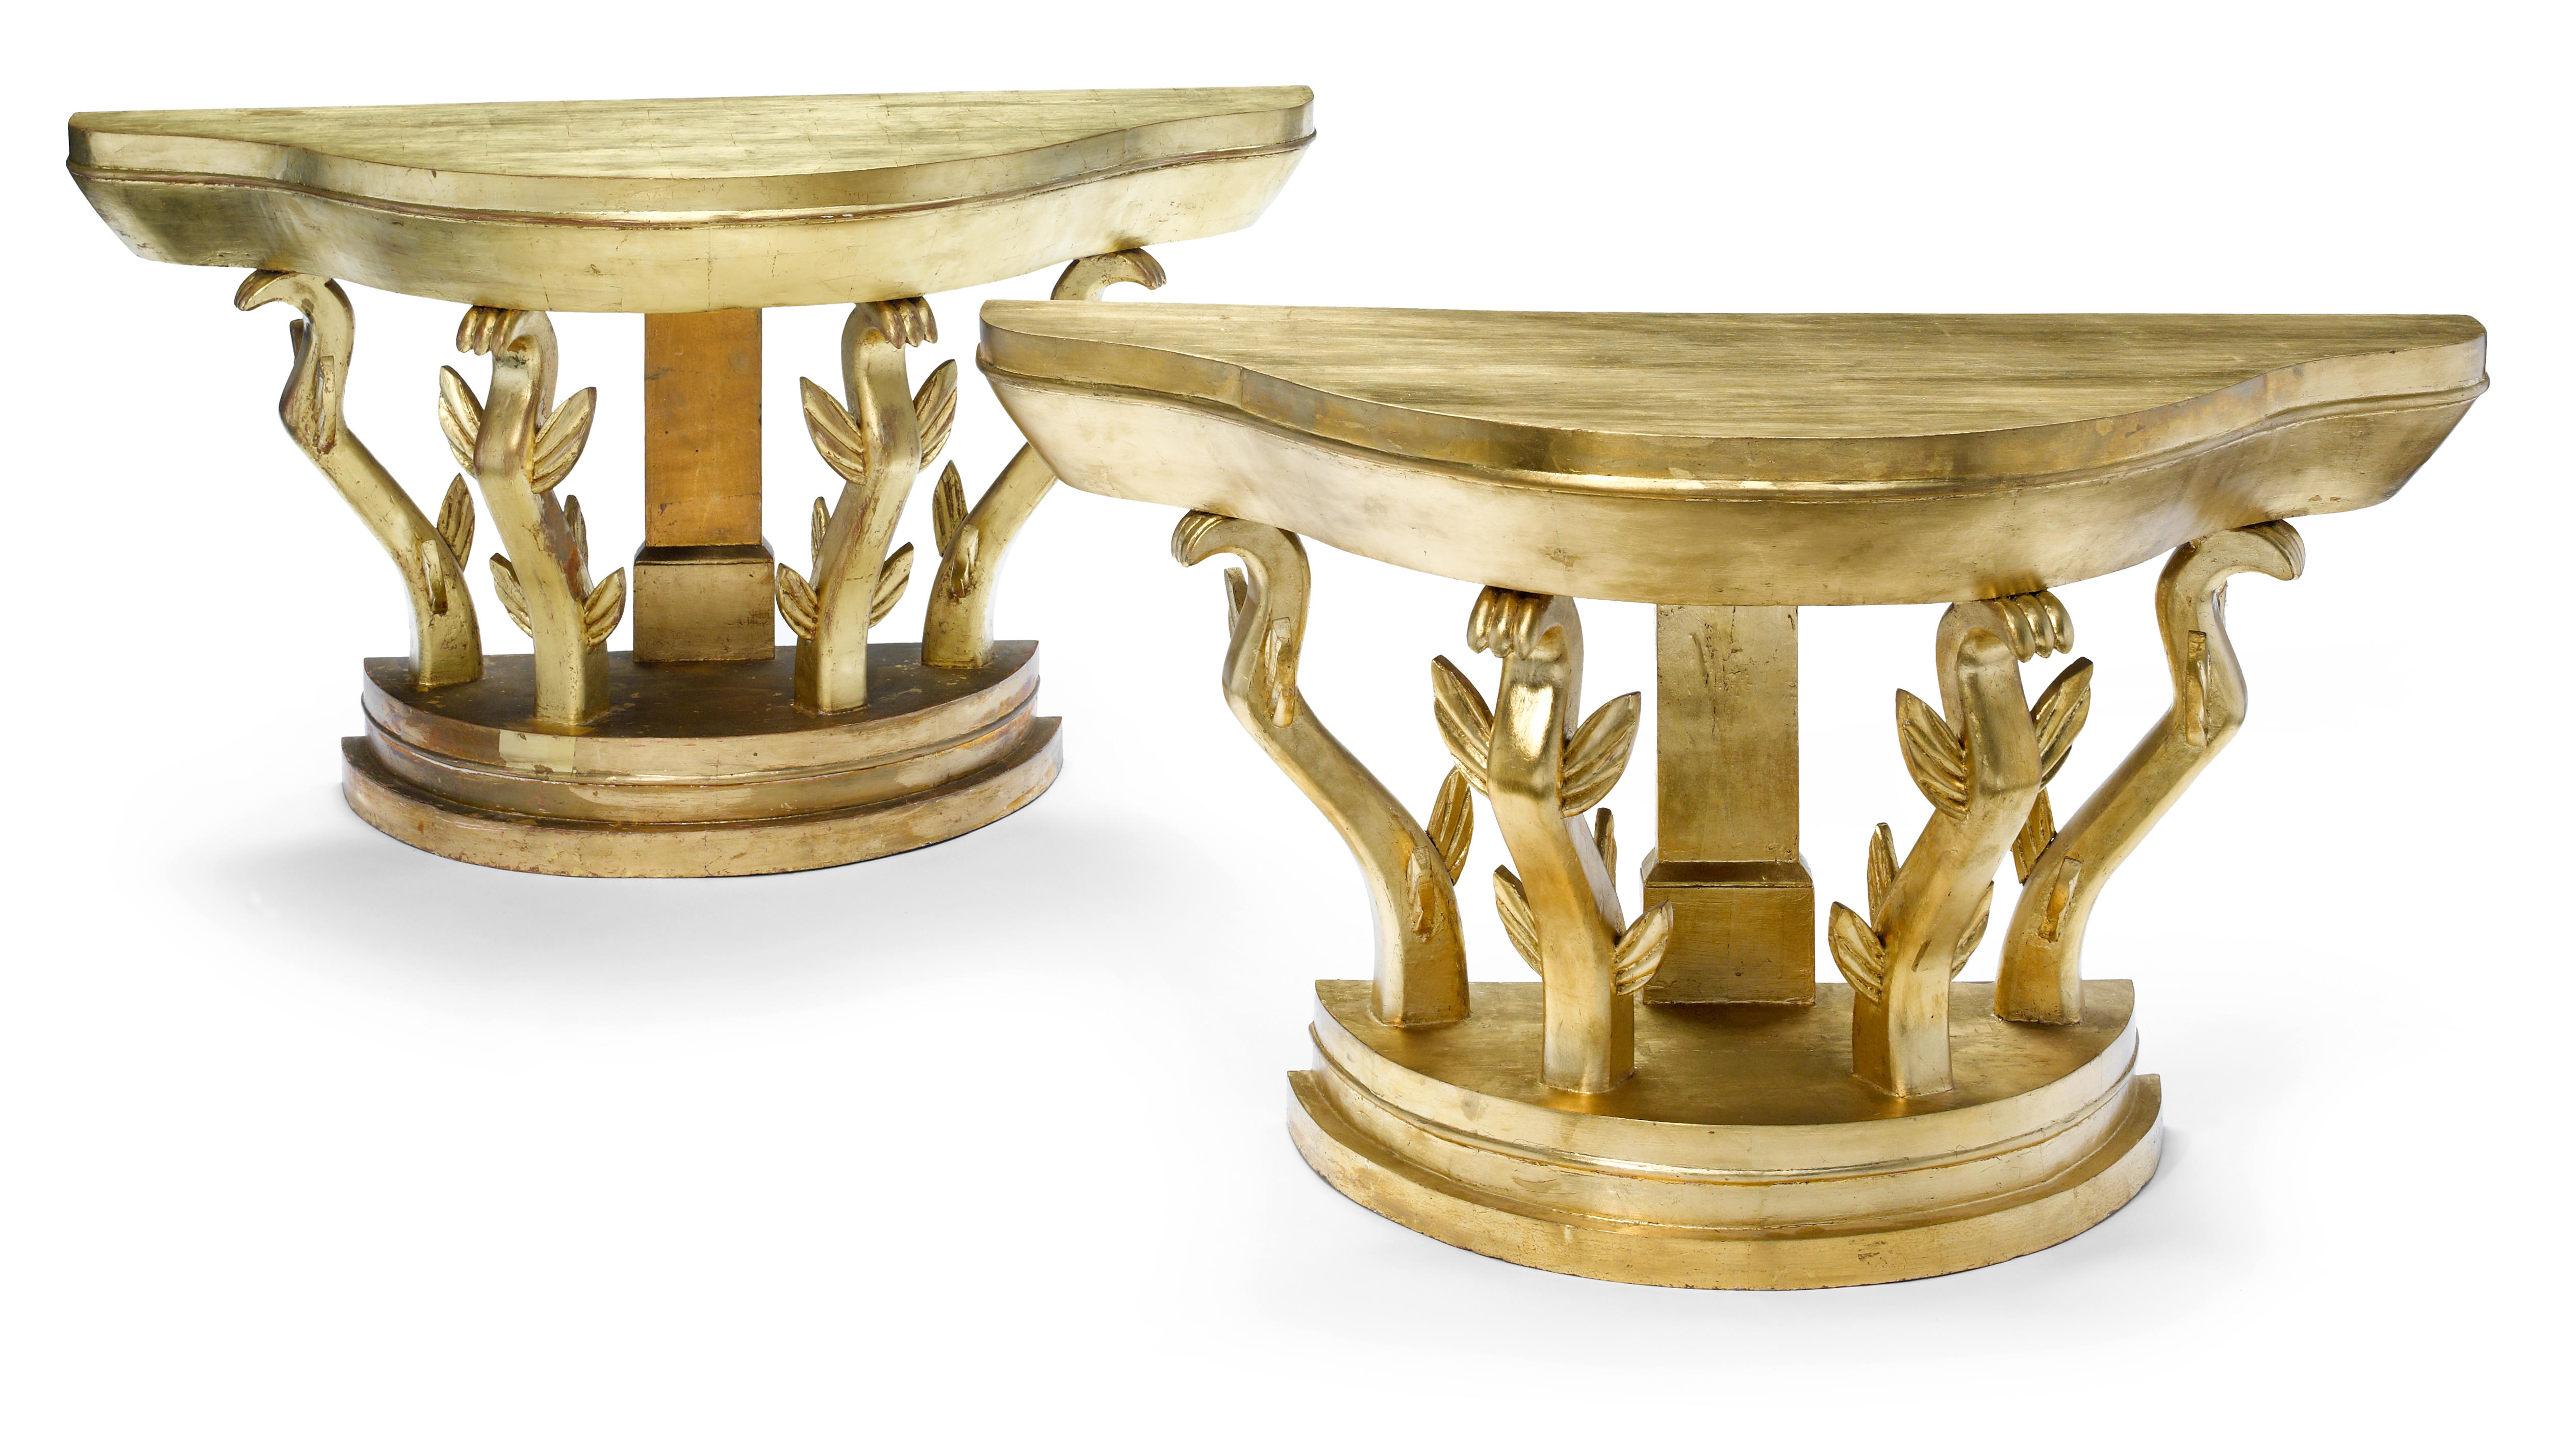 A gold leafed wood demilune console